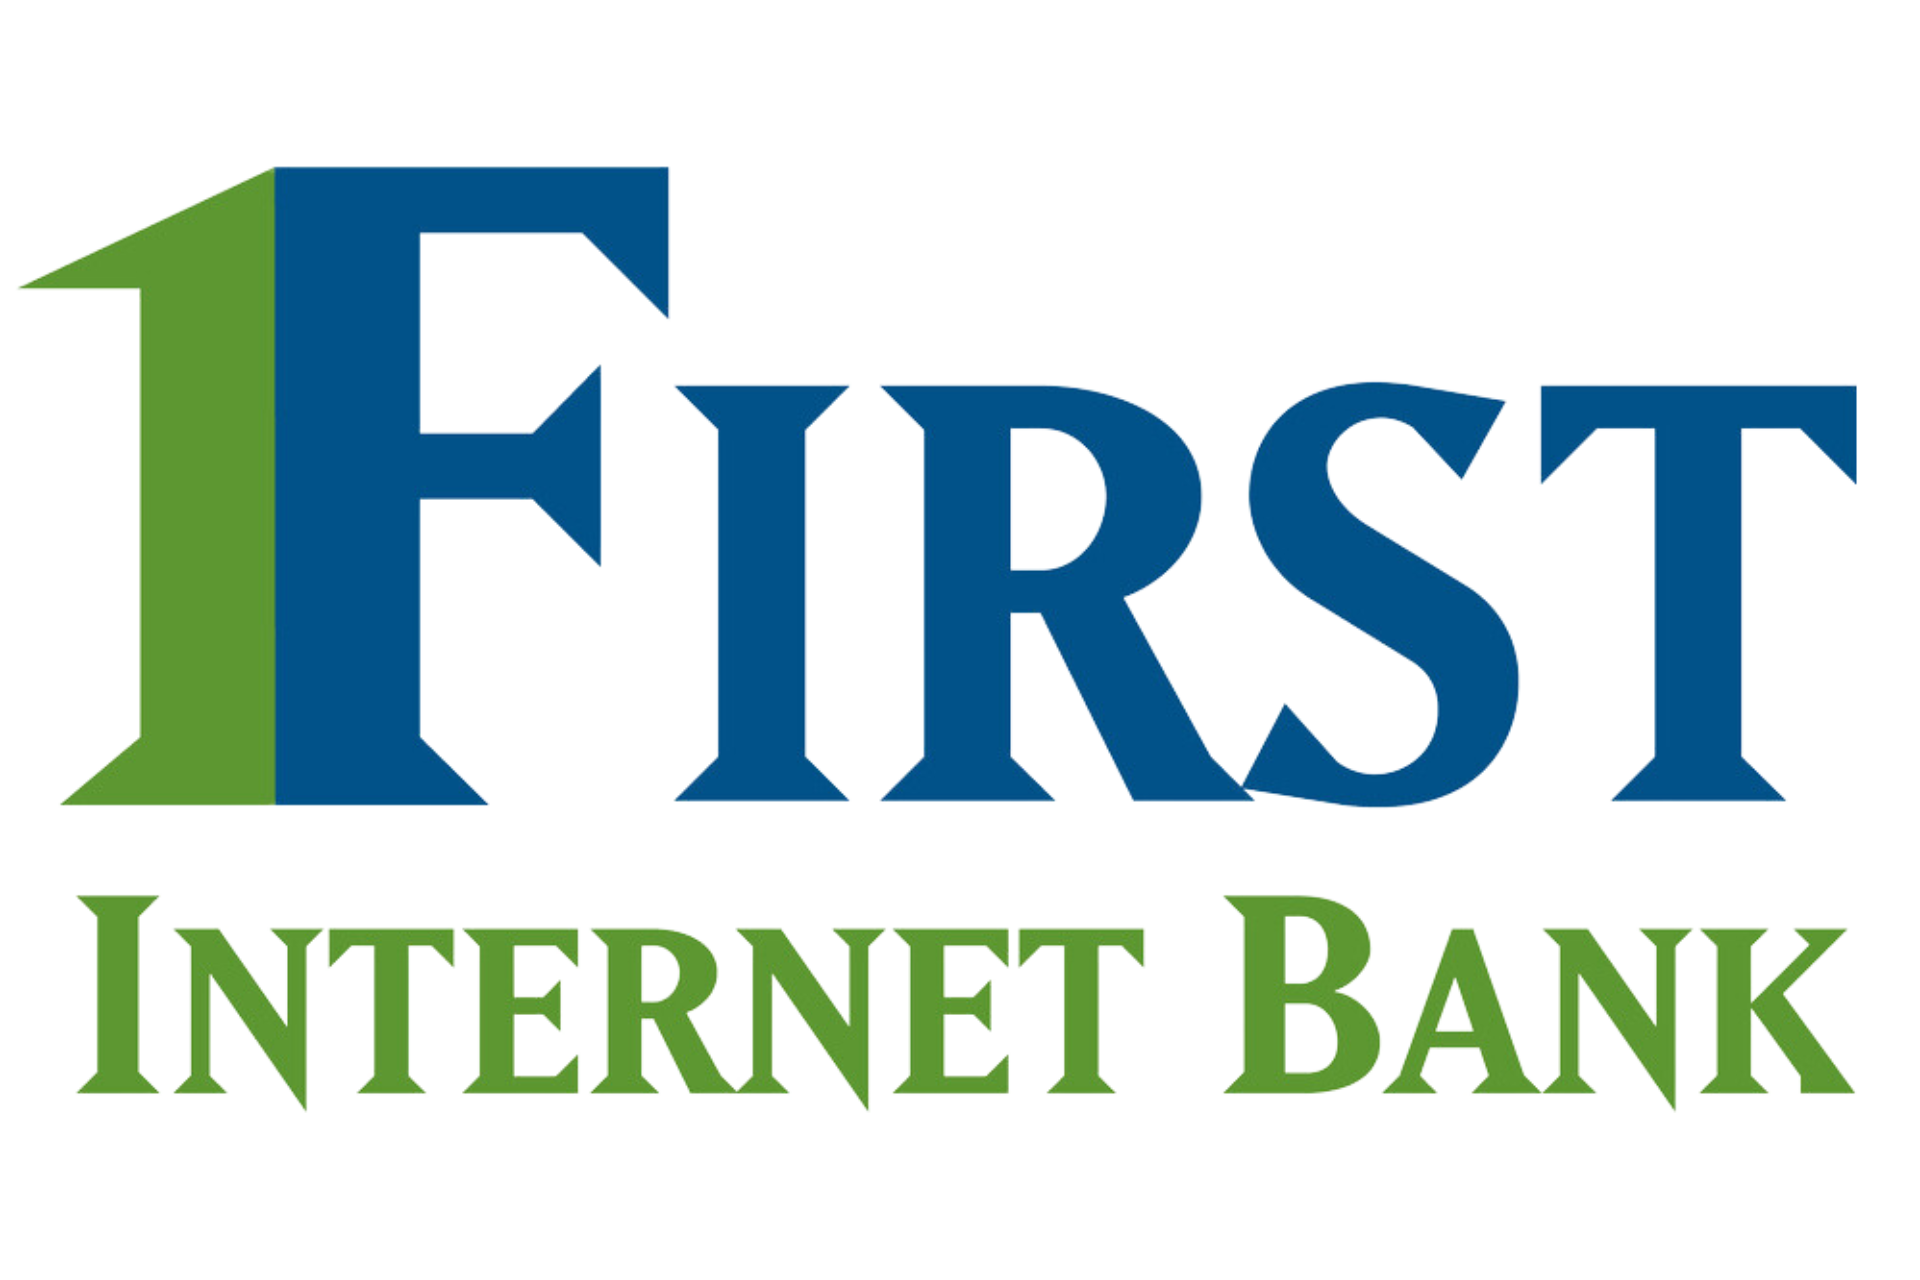 The logo for first internet bank is blue and green